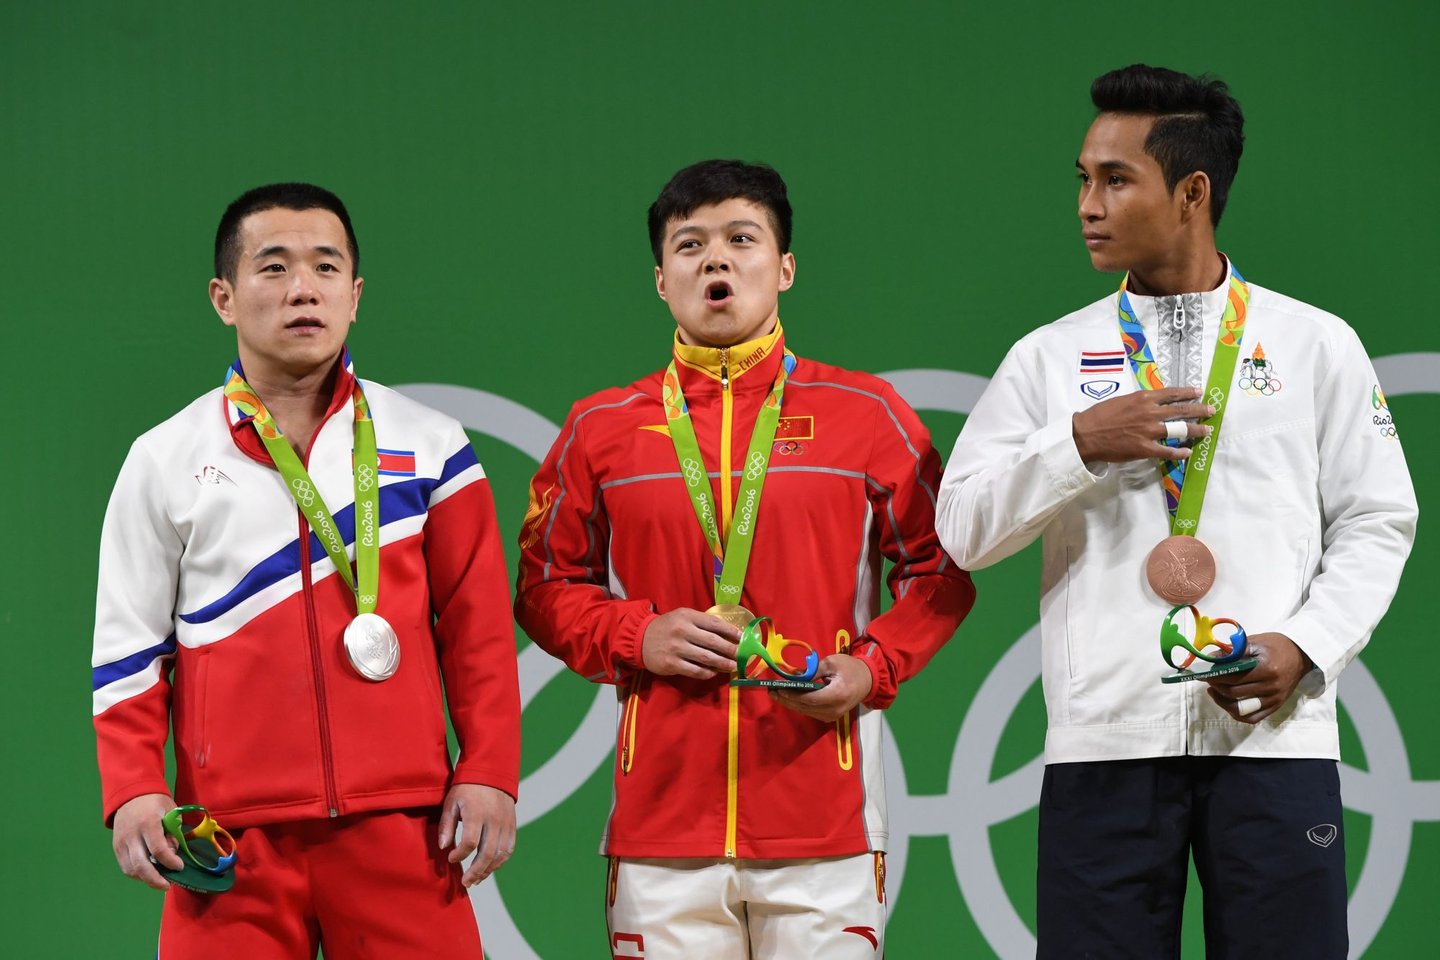 China's gold medallist Long Qingquan (C, North Korea's silver medallist Om Yun Chol (L) and Thailand's bronze medalist Sinphet Kruaithong pose with their medals on the podium during the men's 56kg weightlifting event at the Rio 2016 Olympic games in Rio de Janeiro on August 7, 2016. / AFP / GOH Chai Hin (Photo credit should read GOH CHAI HIN/AFP/Getty Images)